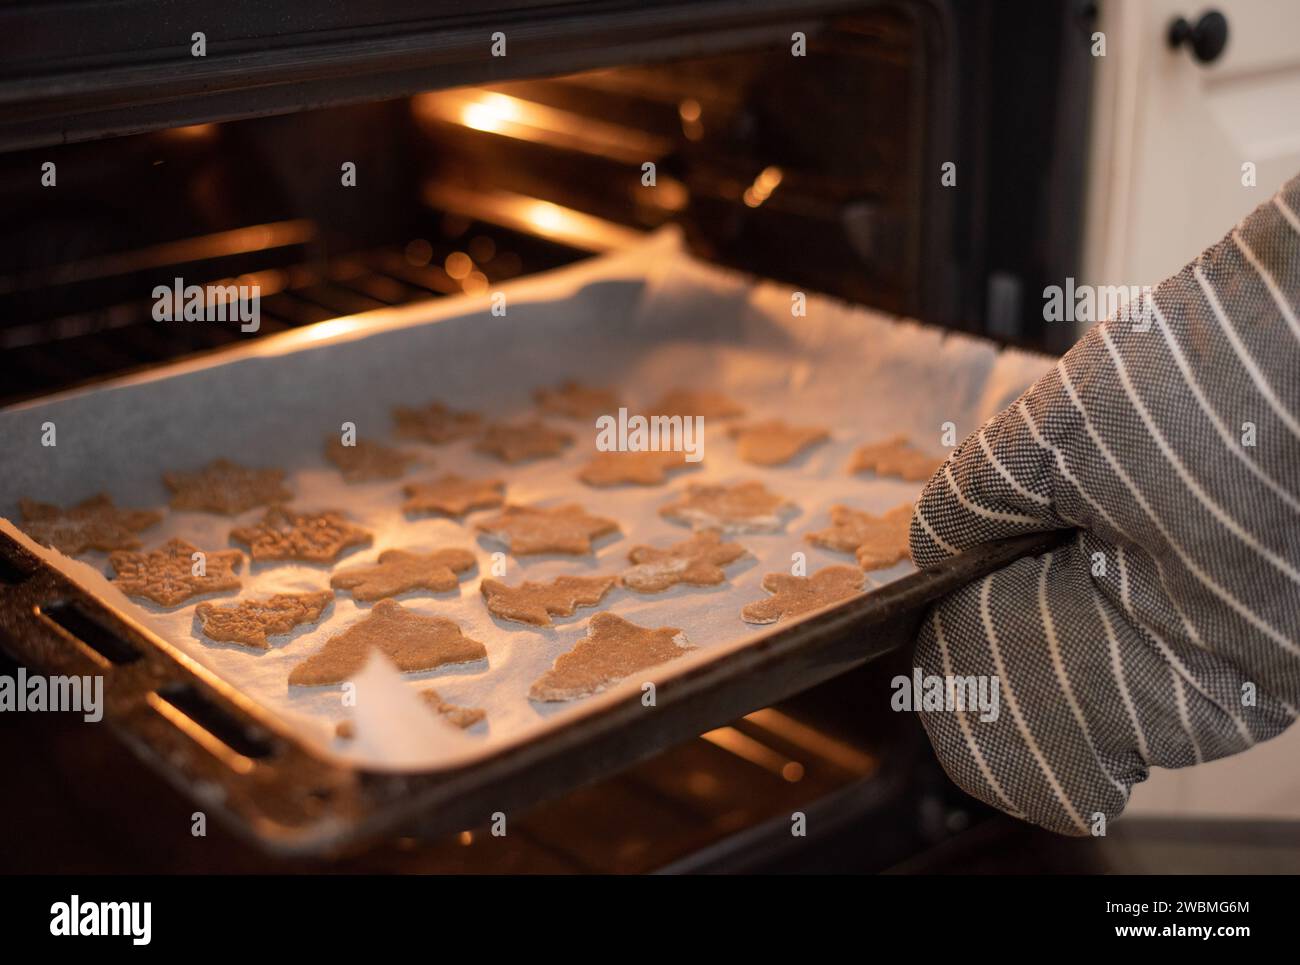 Young adult woman baking homemade chocolate chip cookie in modern kitchen oven Stock Photo